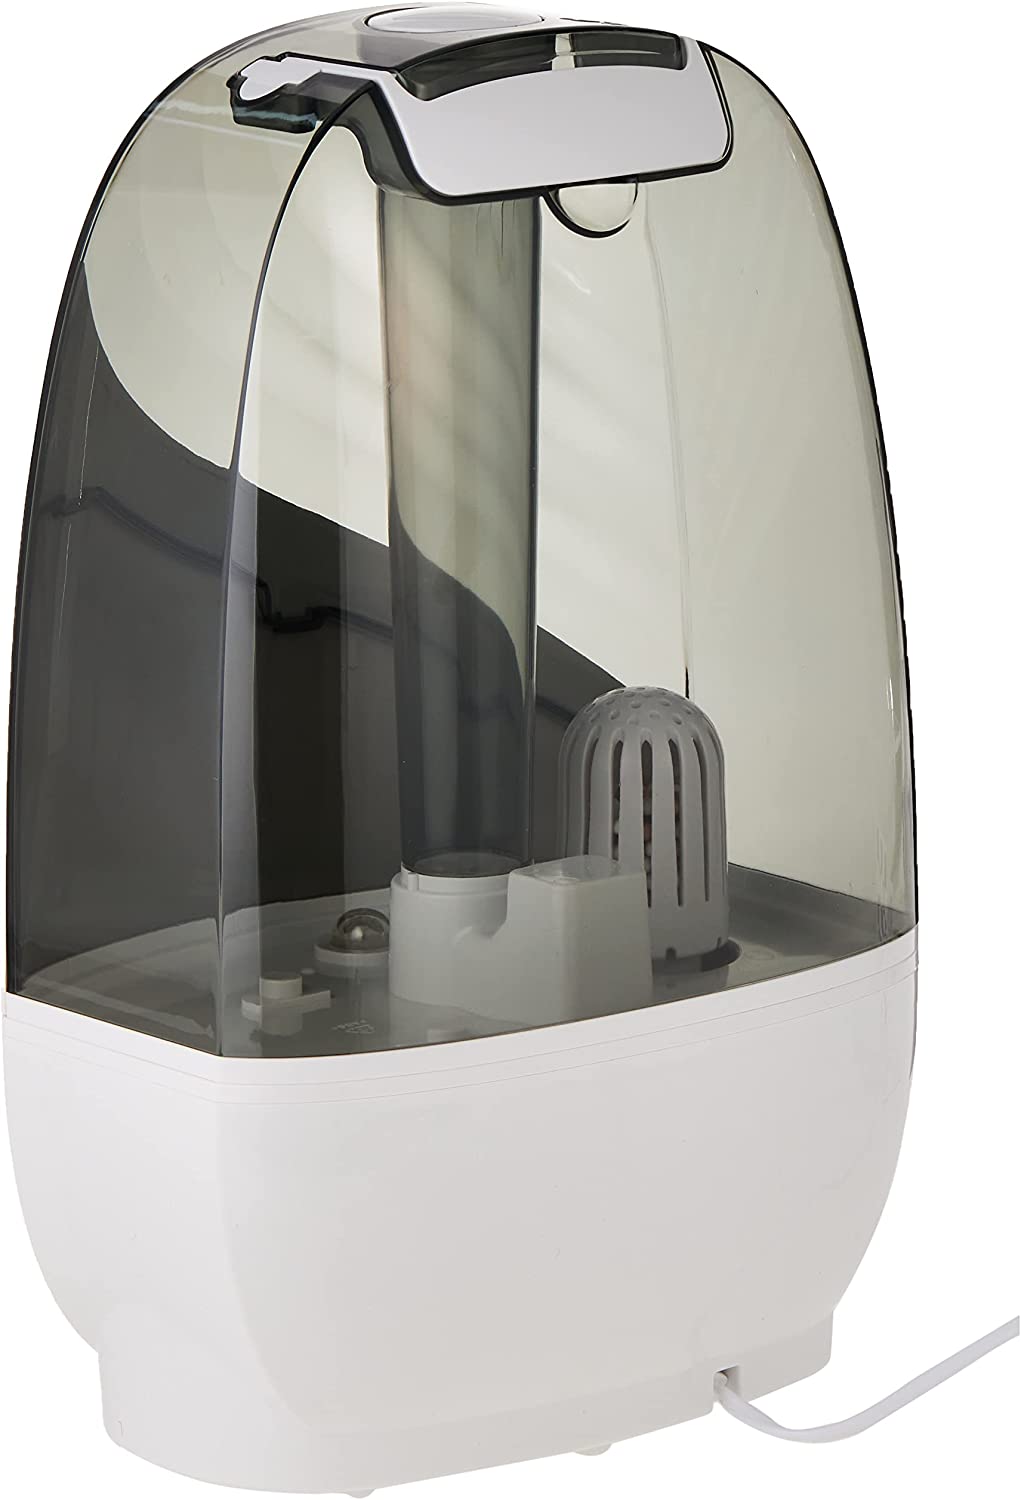 Trister Humidifier With Ionizer & Filter 5.8L : TS 155H5.8, Standard Packing